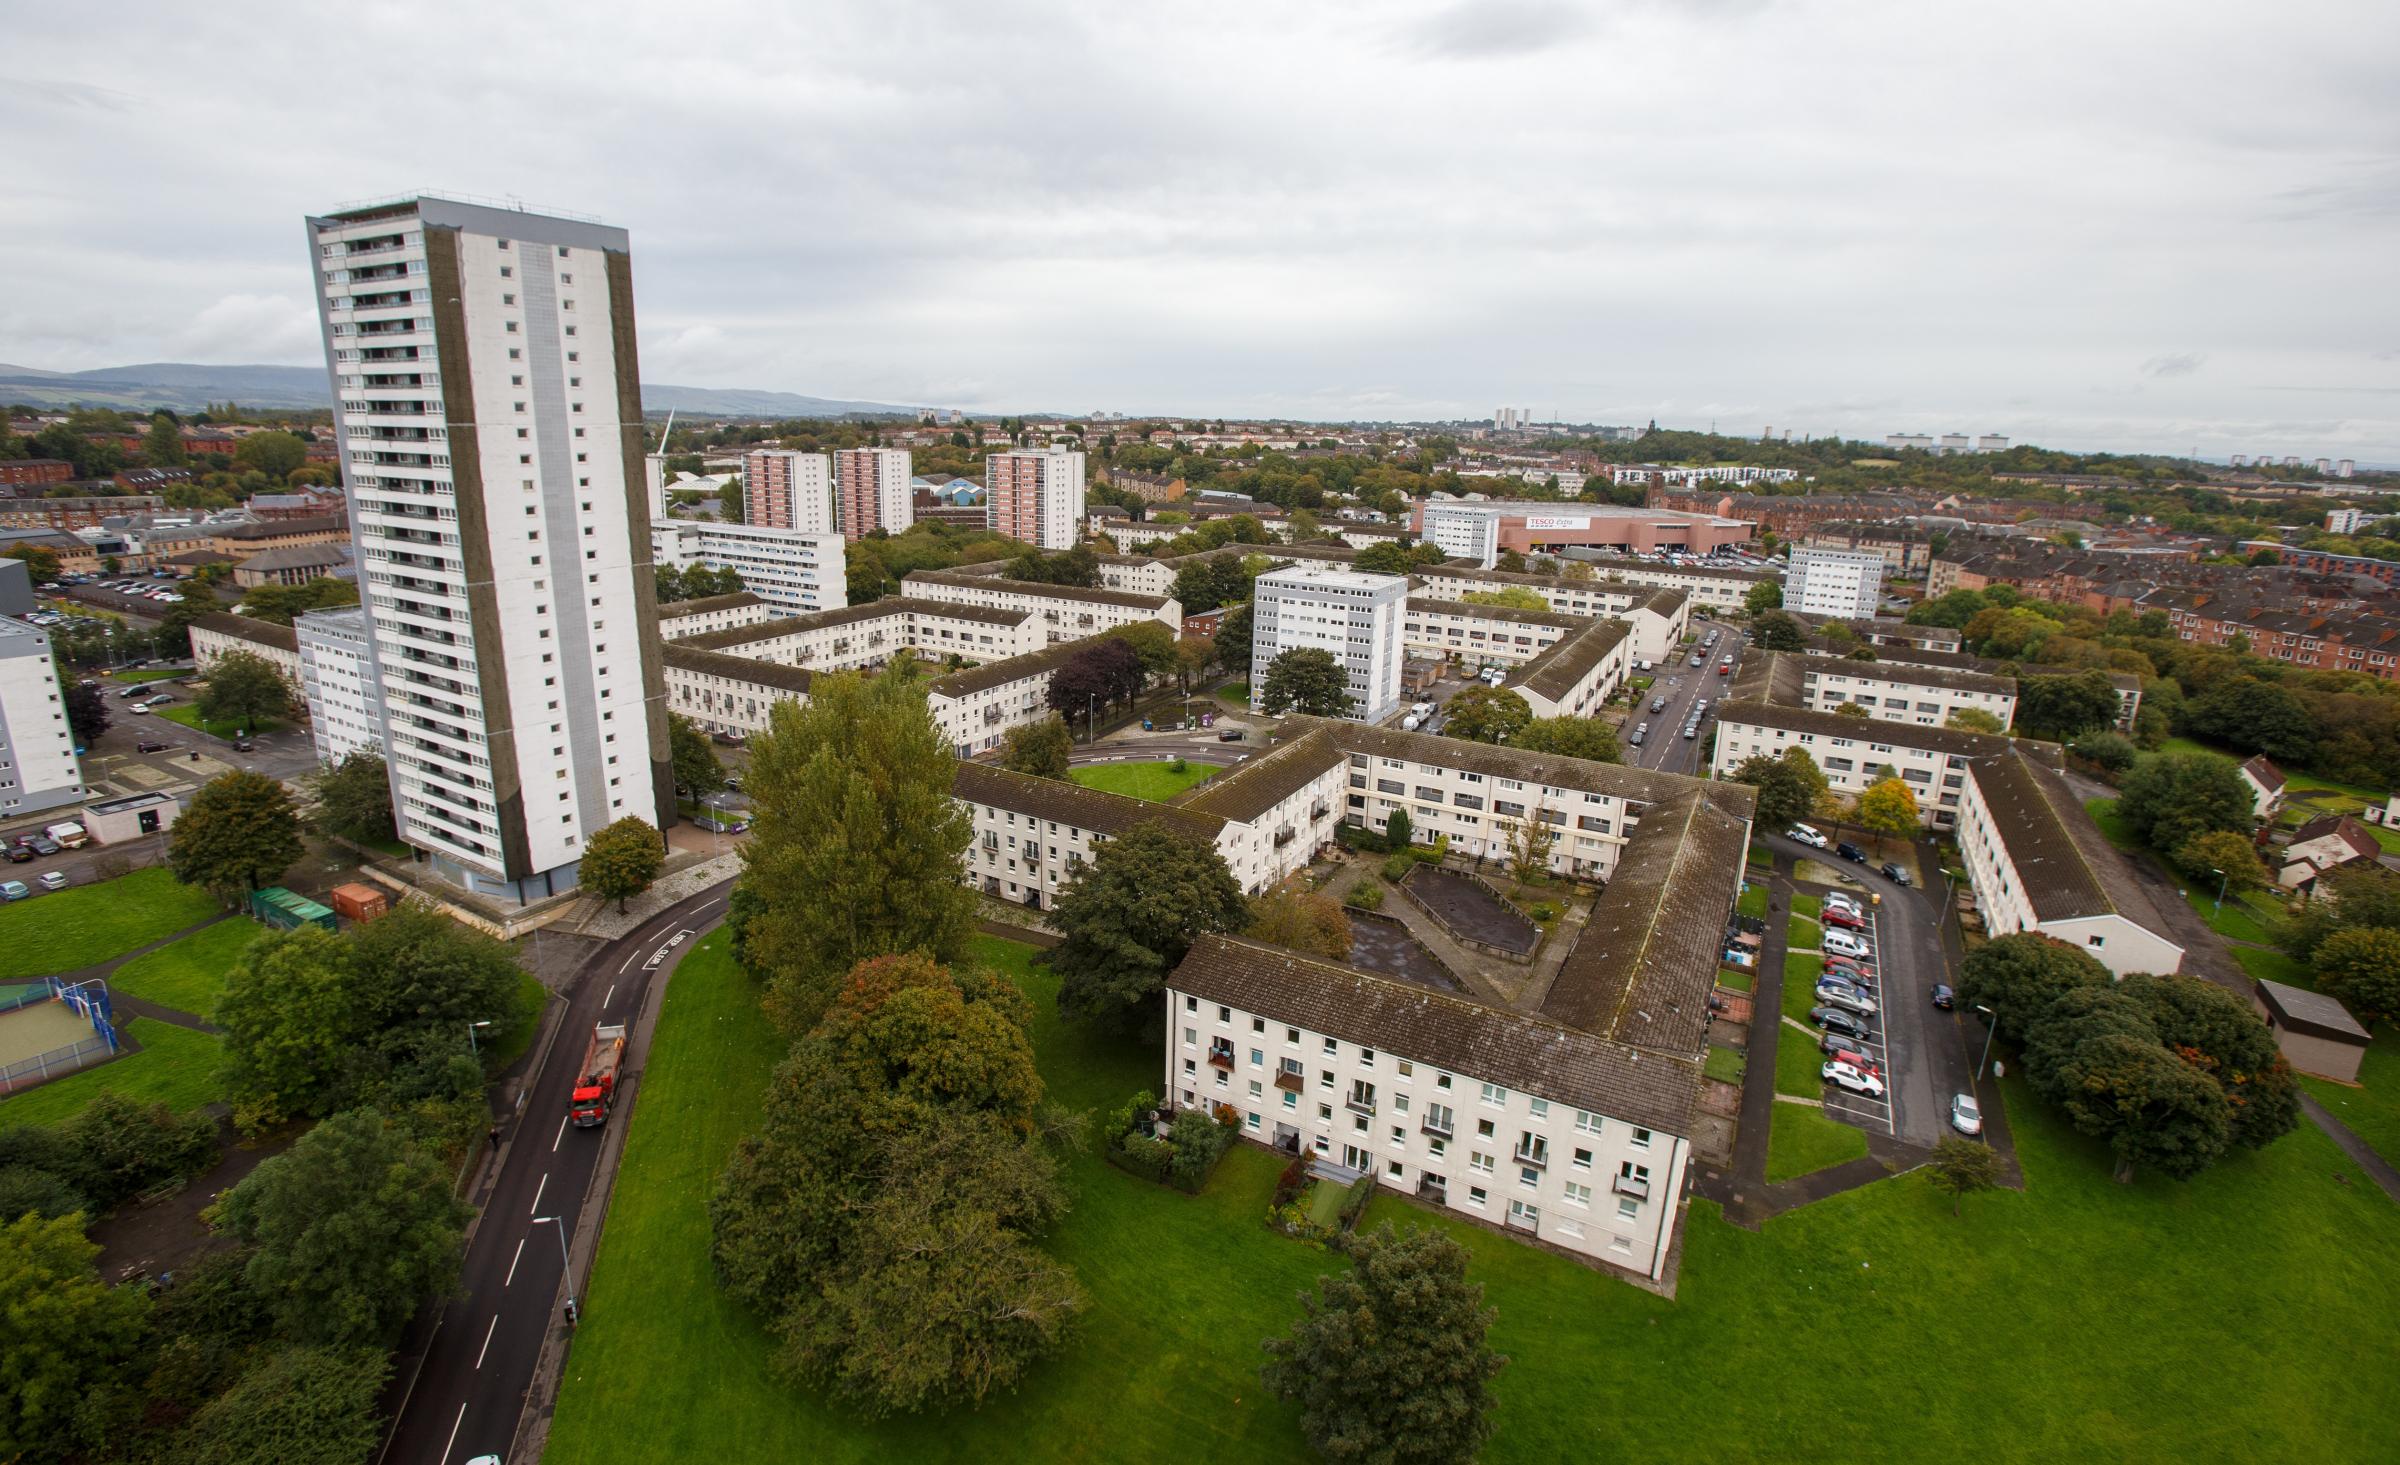 Four tower blocks in The Wyndford are earmarked for demolition. Photograph by Colin Mearns.